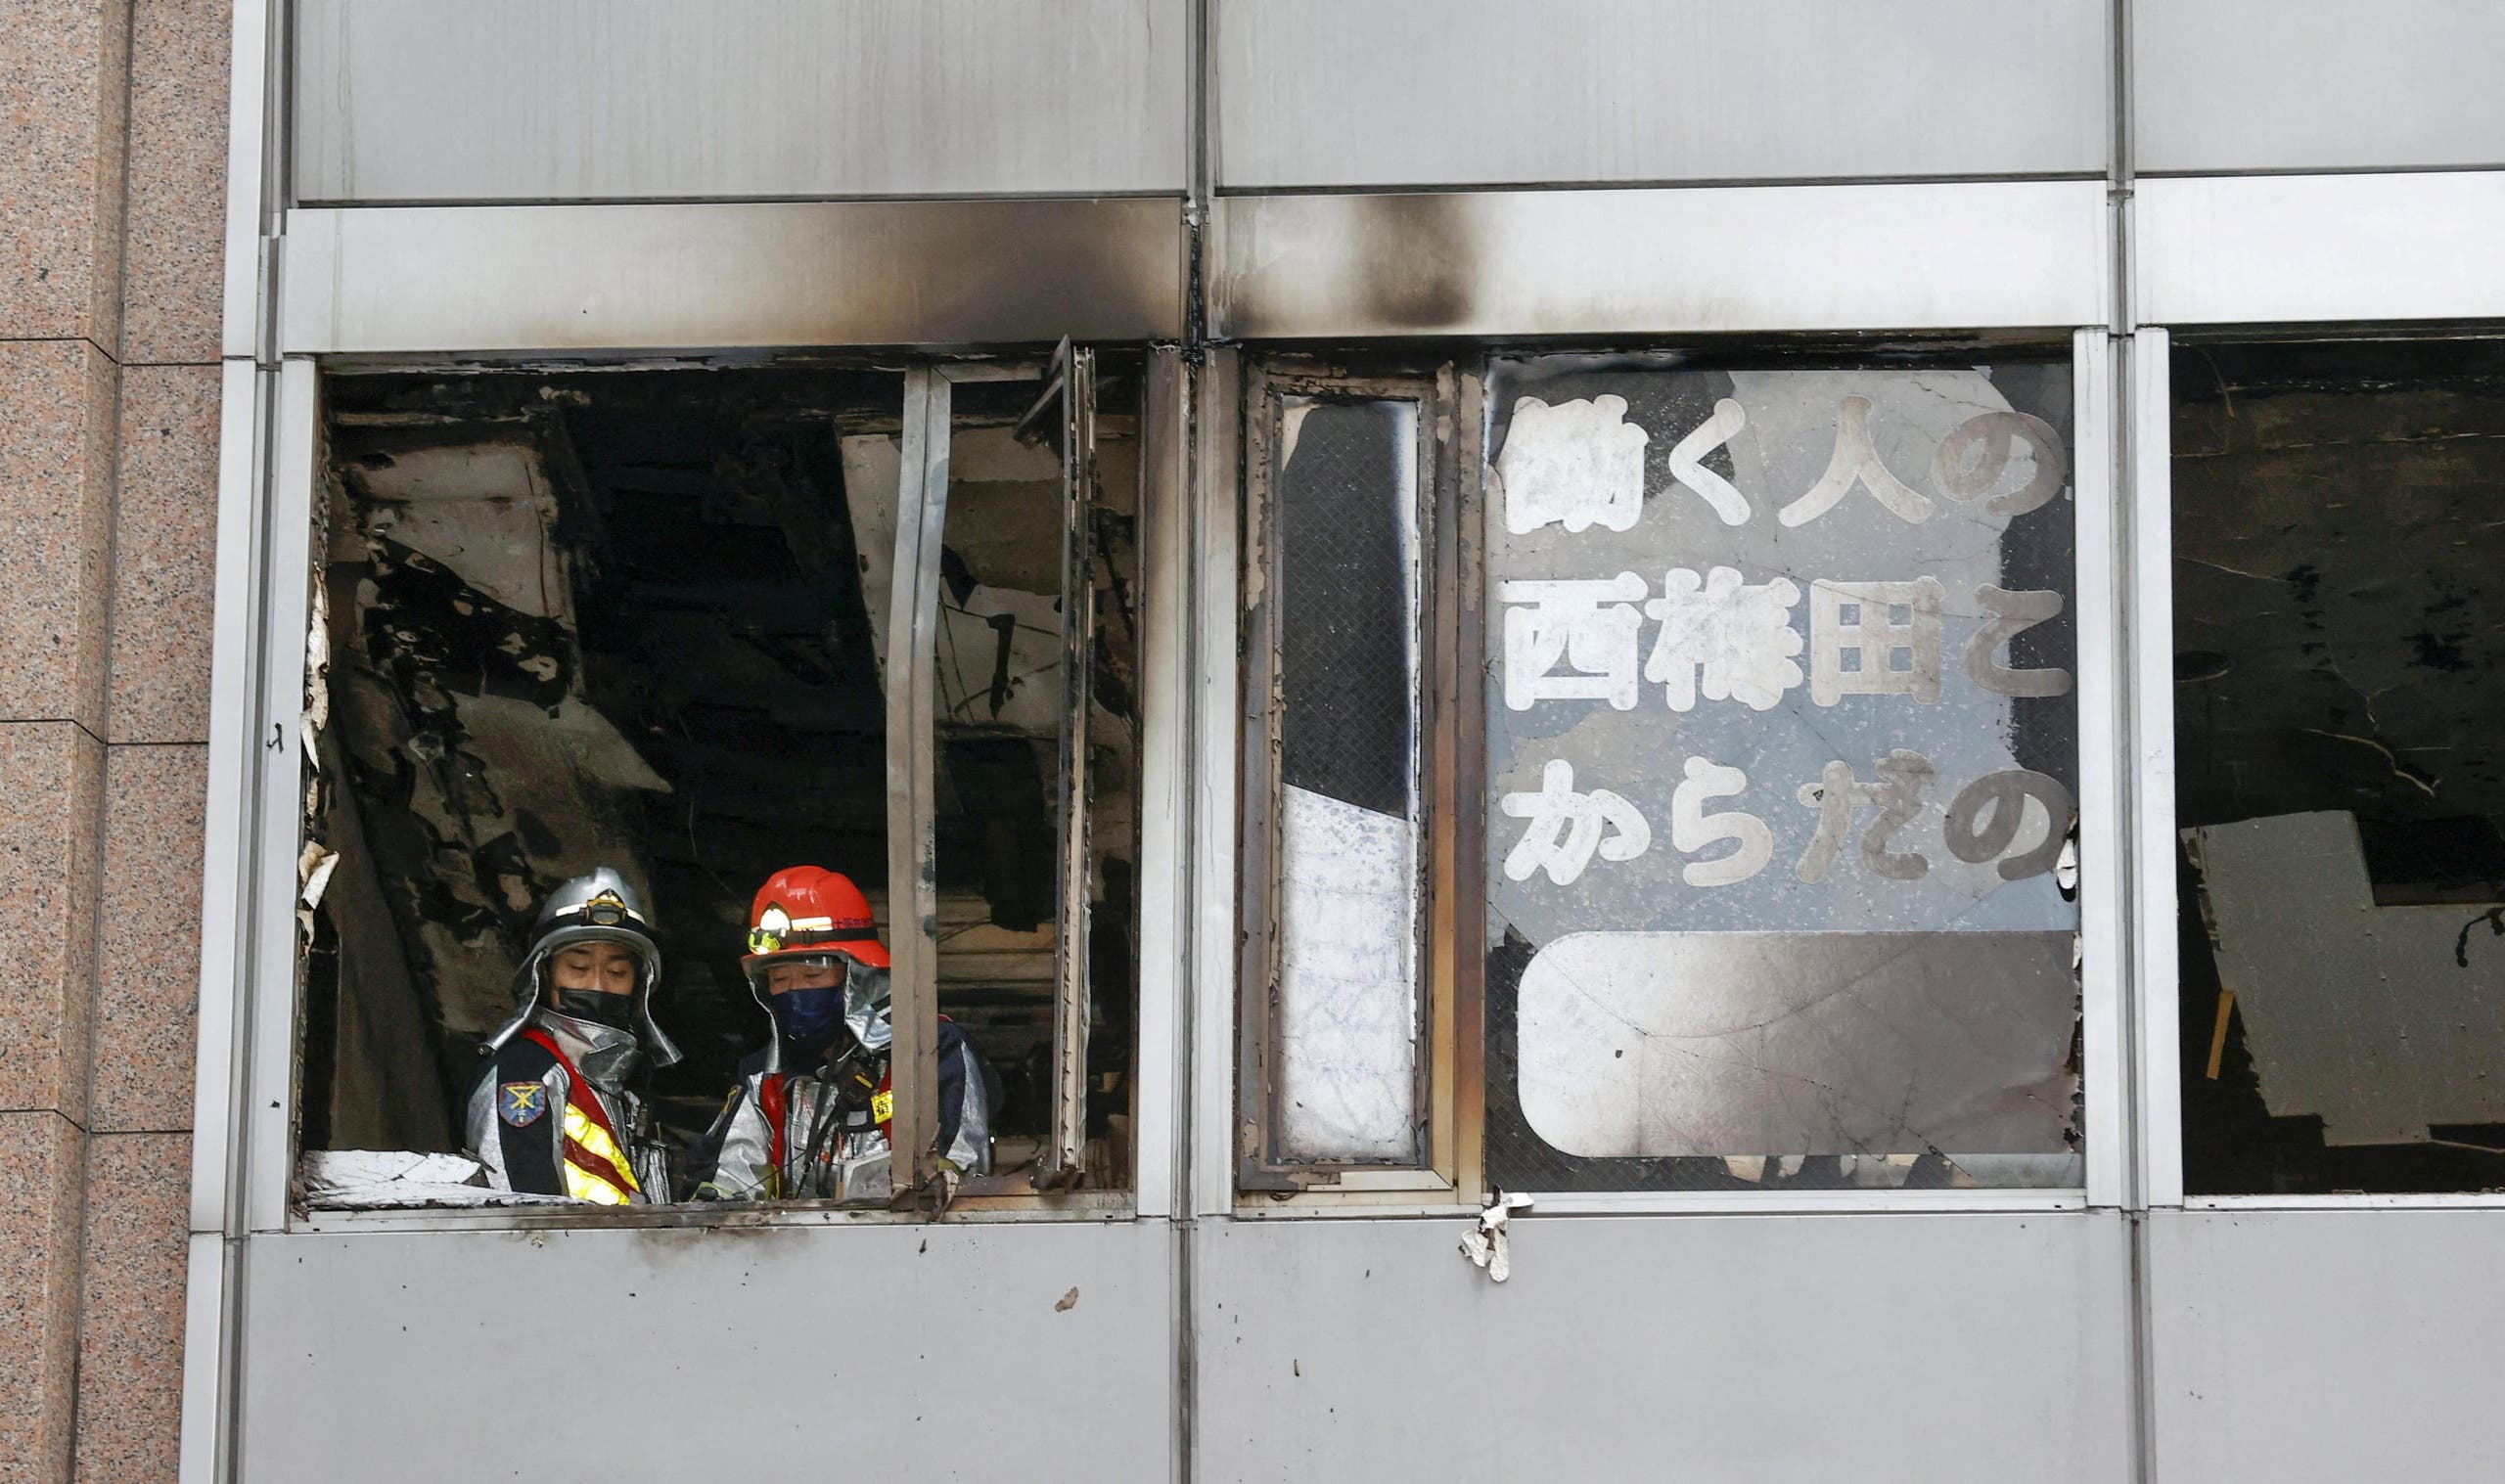 Firefighters inside the building